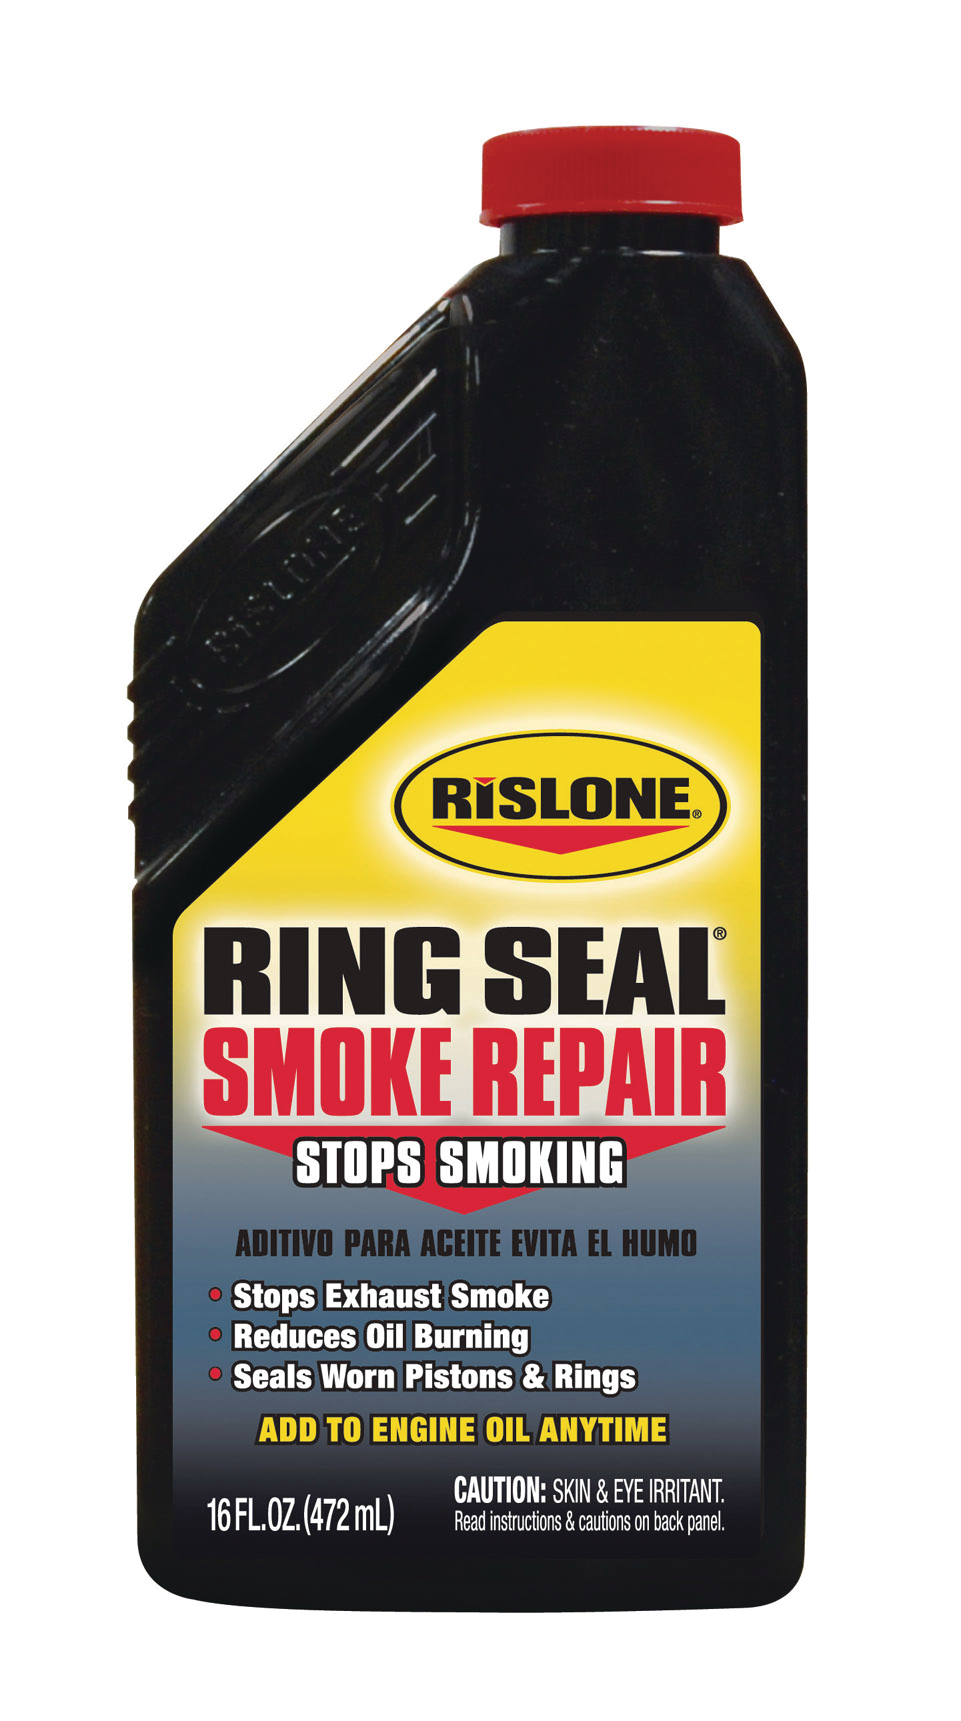 Rislone Ring Seal Smoke Repair From Bar's Products Inc. For